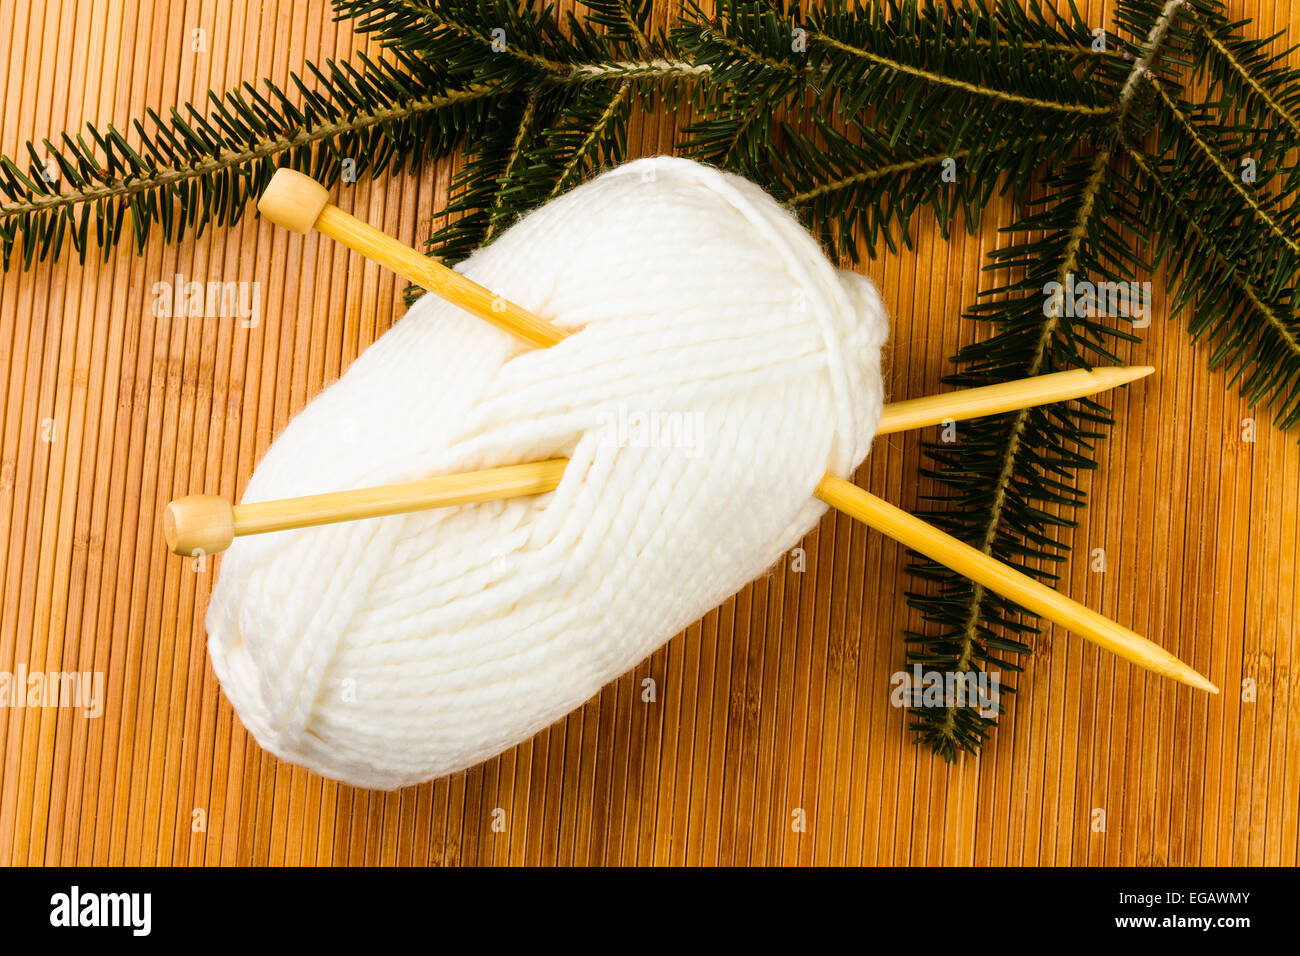 roll of white soft knitting yarn and yew branch on wooden background Stock Photo